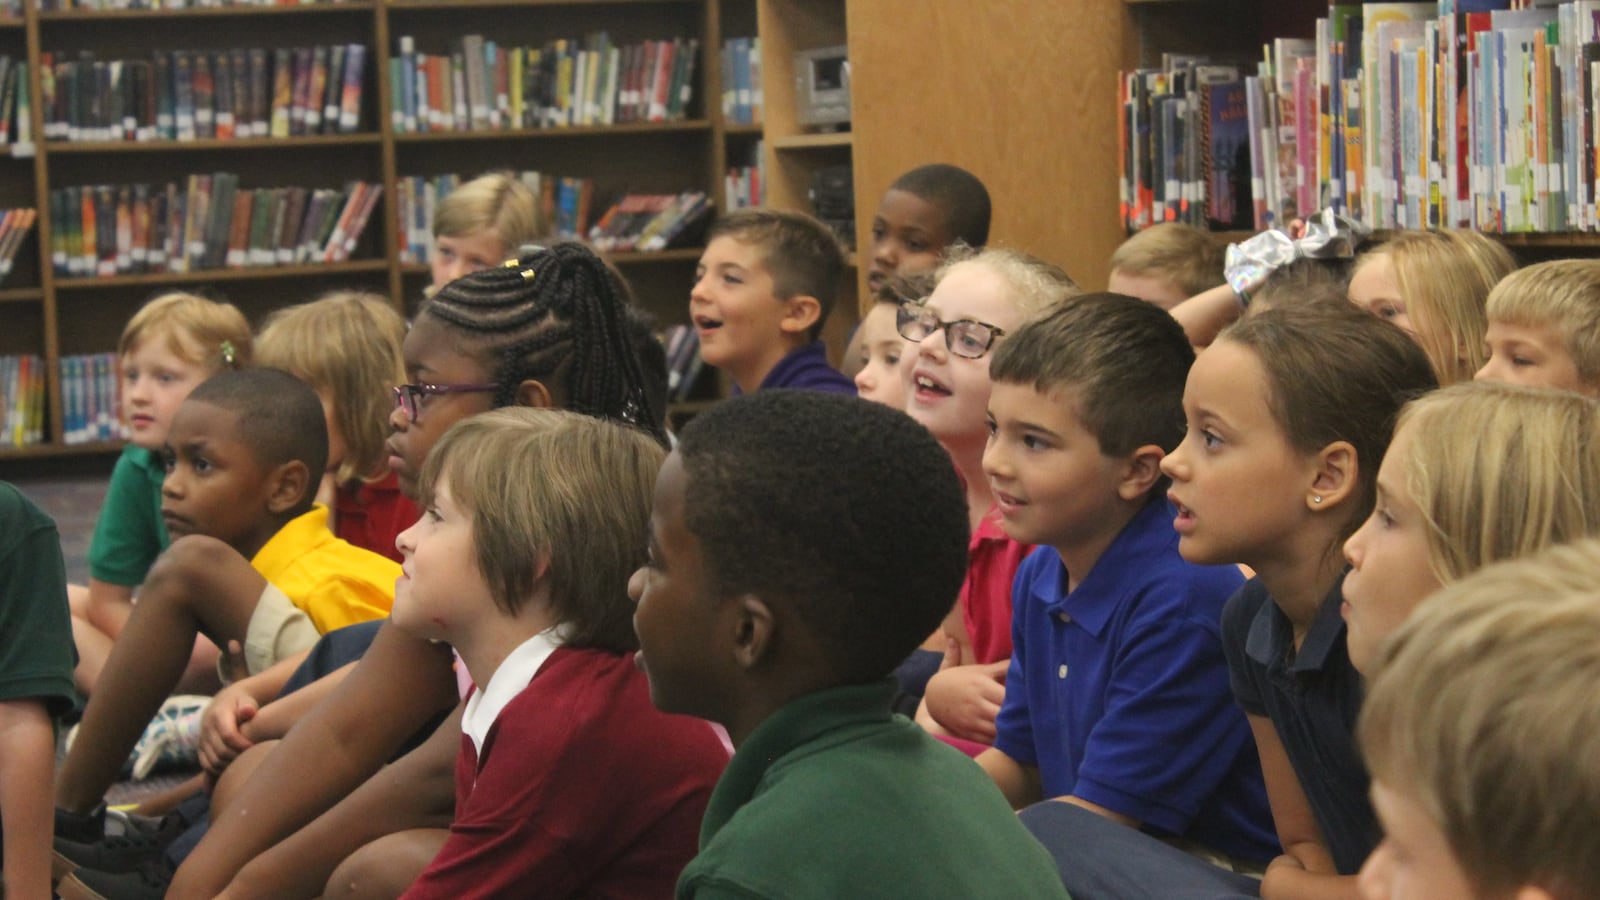 Second grade students listened attentively as Ferebee read a children’s book in the school library.